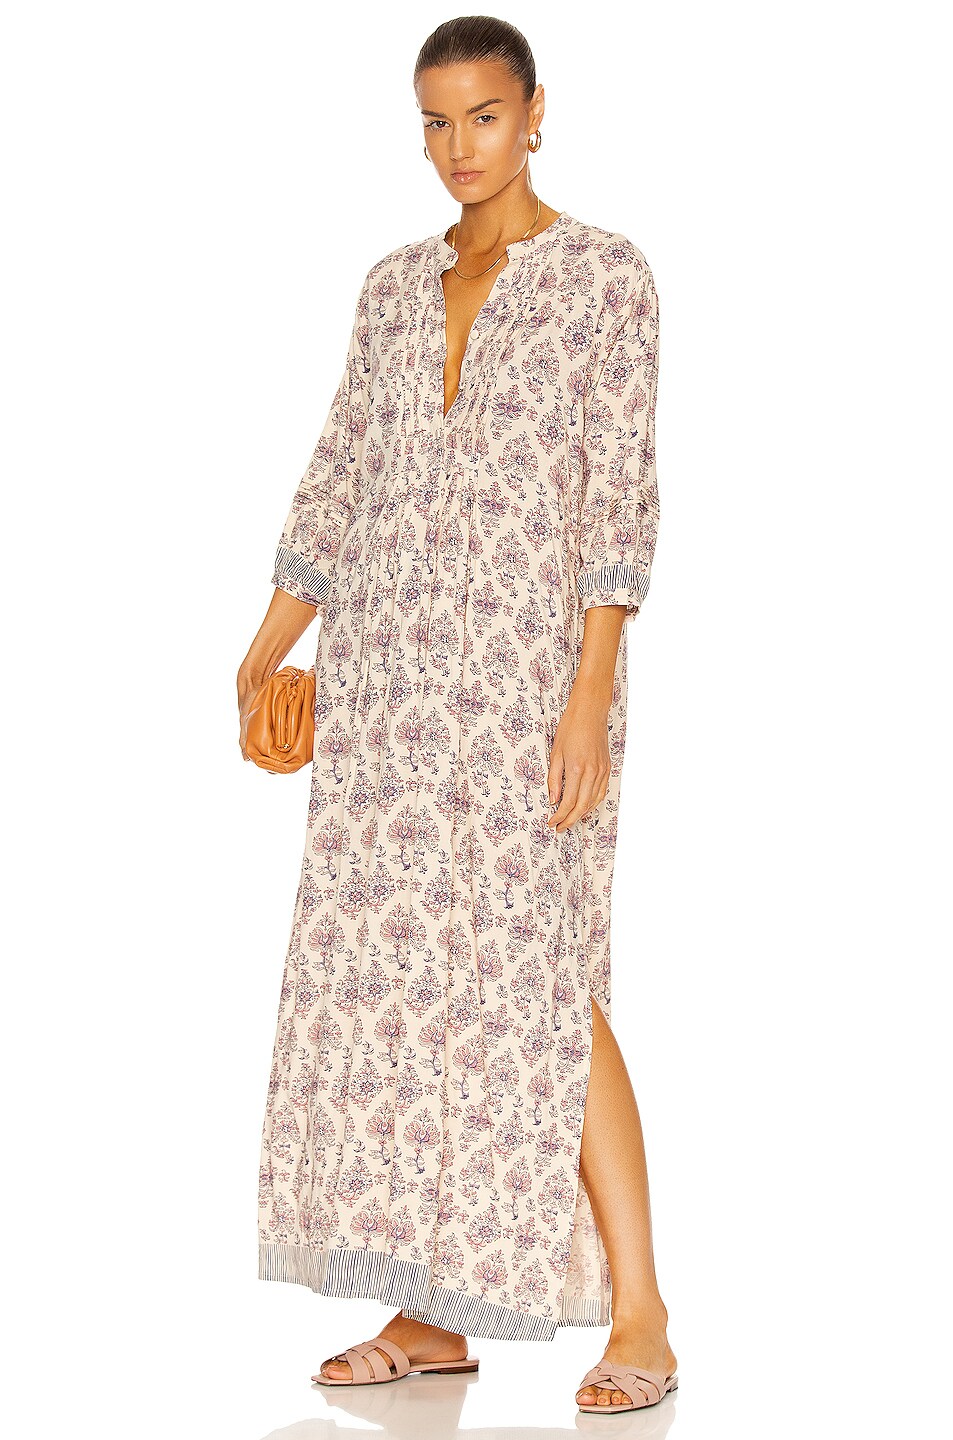 Image 1 of Natalie Martin Sammie Maxi Dress in Cyprus Print Lilac